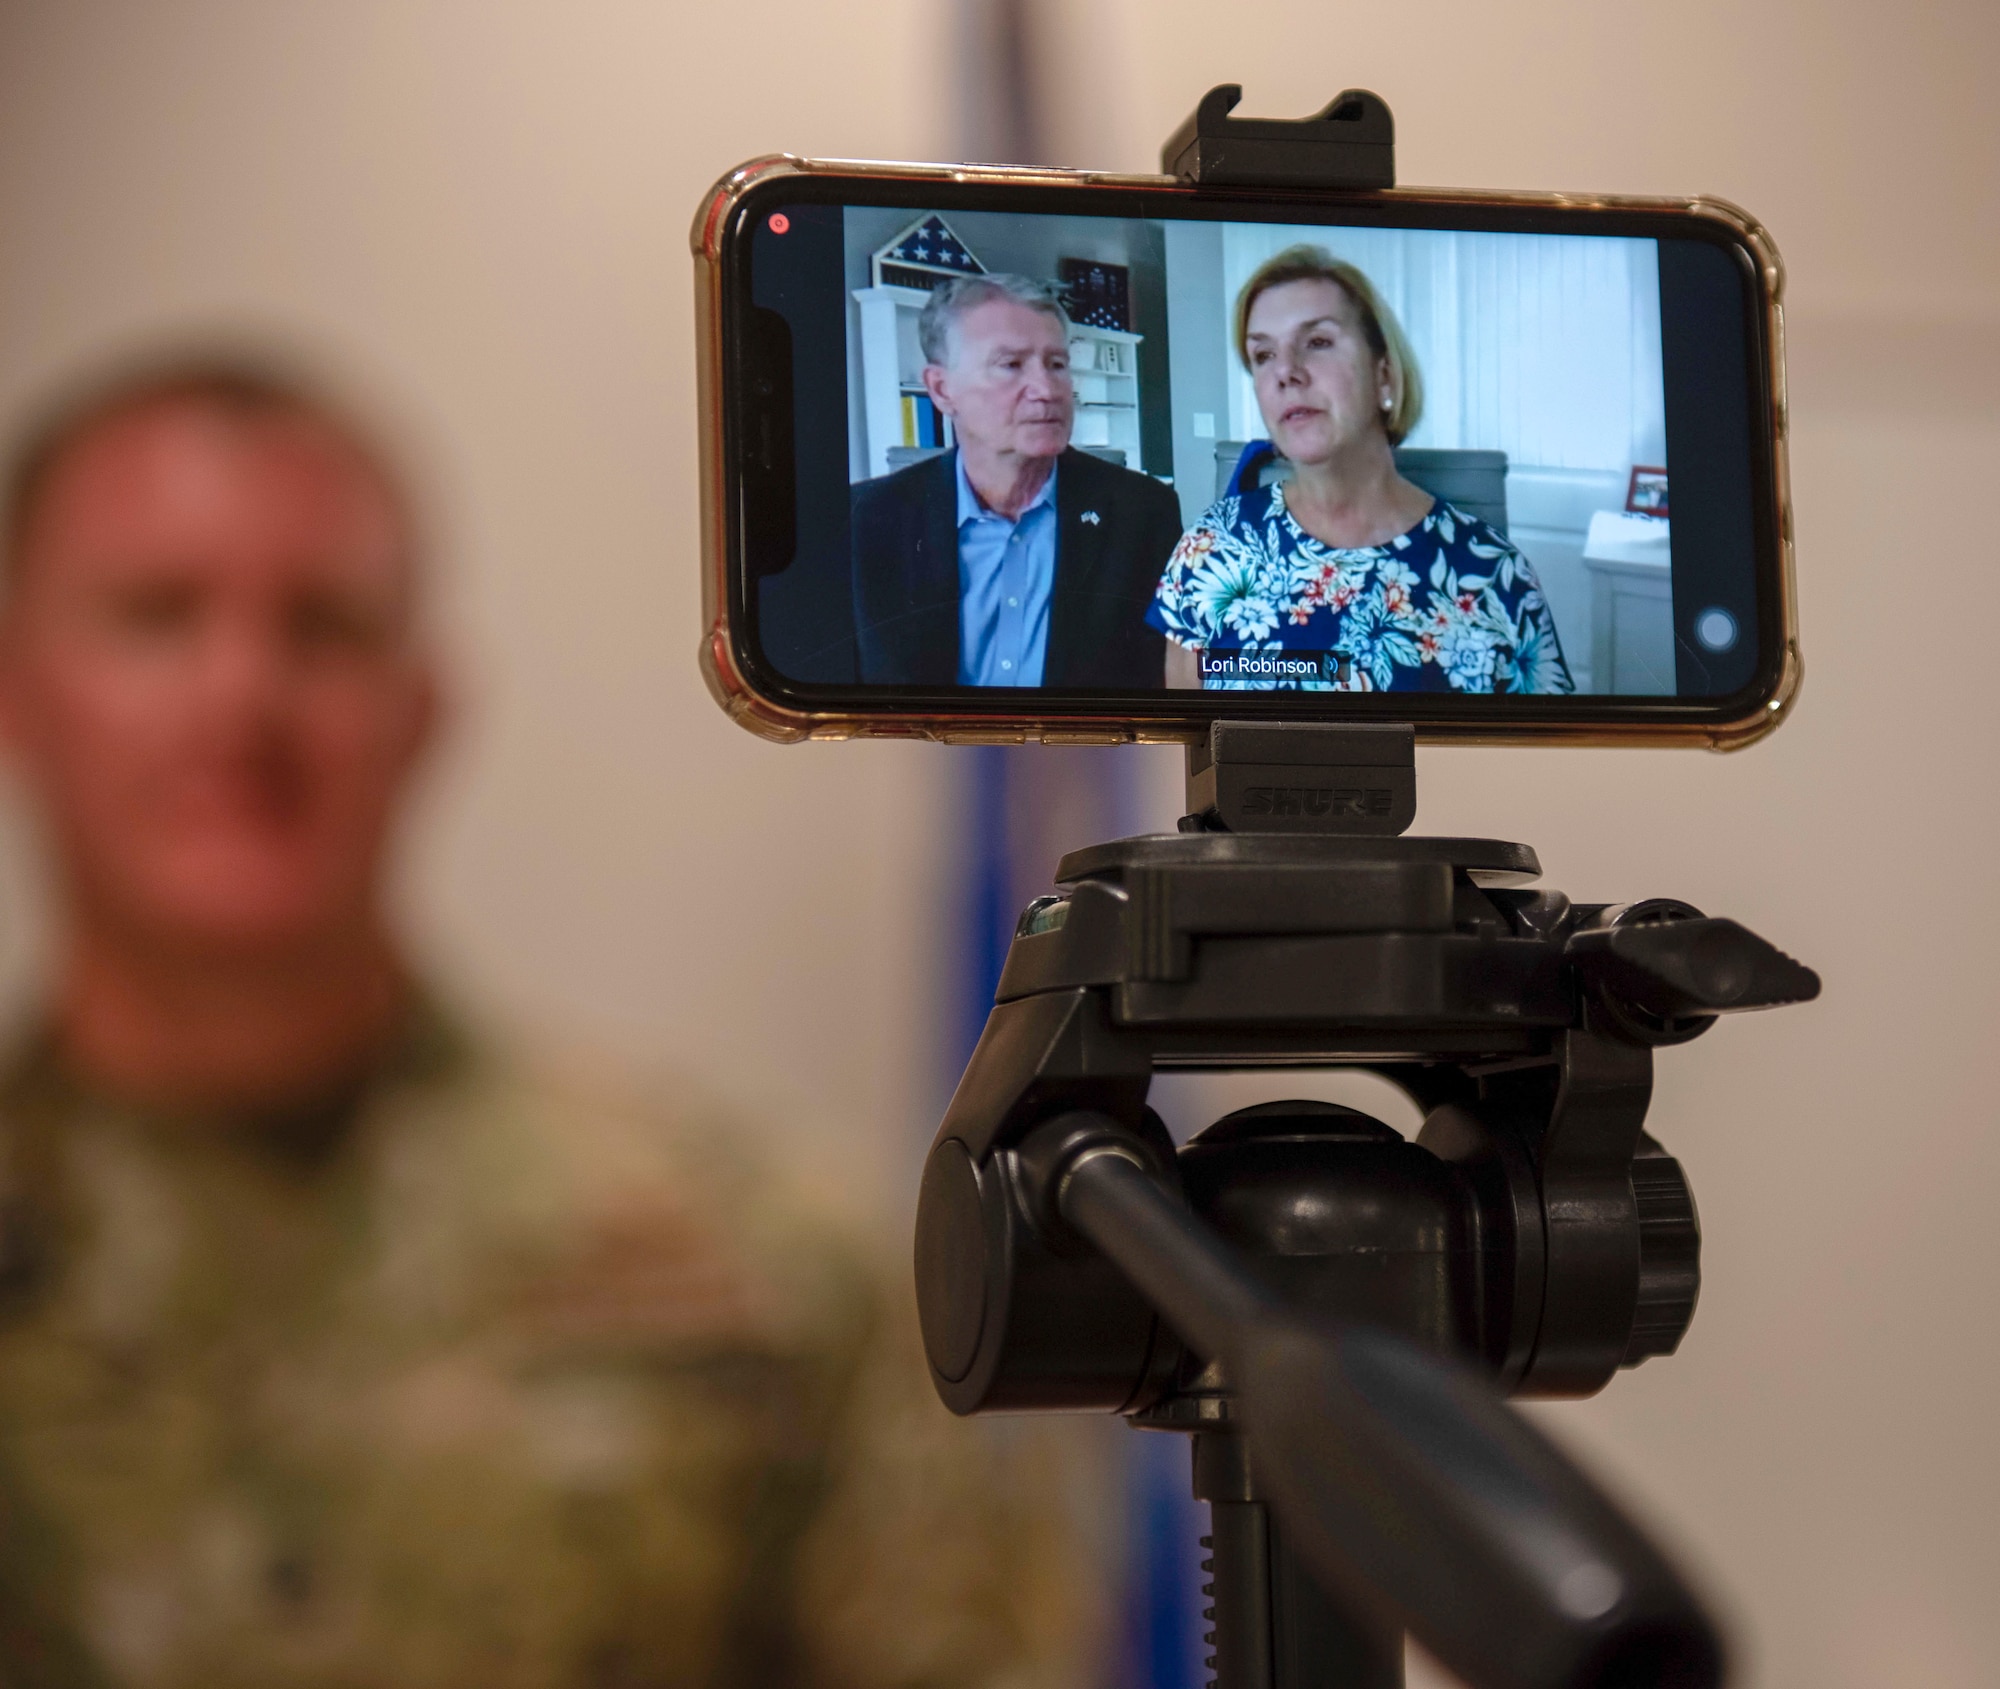 Retired U.S. Air Force Gen. Lori Robinson speaks during a virtual ceremony held at the 337th Air Control Squadron Air Battle Manager schoolhouse at Tyndall Air Force Base, Florida, May 26, 2020. Robinson was honored for her many accomplishments including a illustrious career and becoming the first female combatant commander. The 337th ACS ABM schoolhouse was named and dedicated to Robinson. (U.S. Air Force photo by Staff Sgt. Magen M. Reeves)